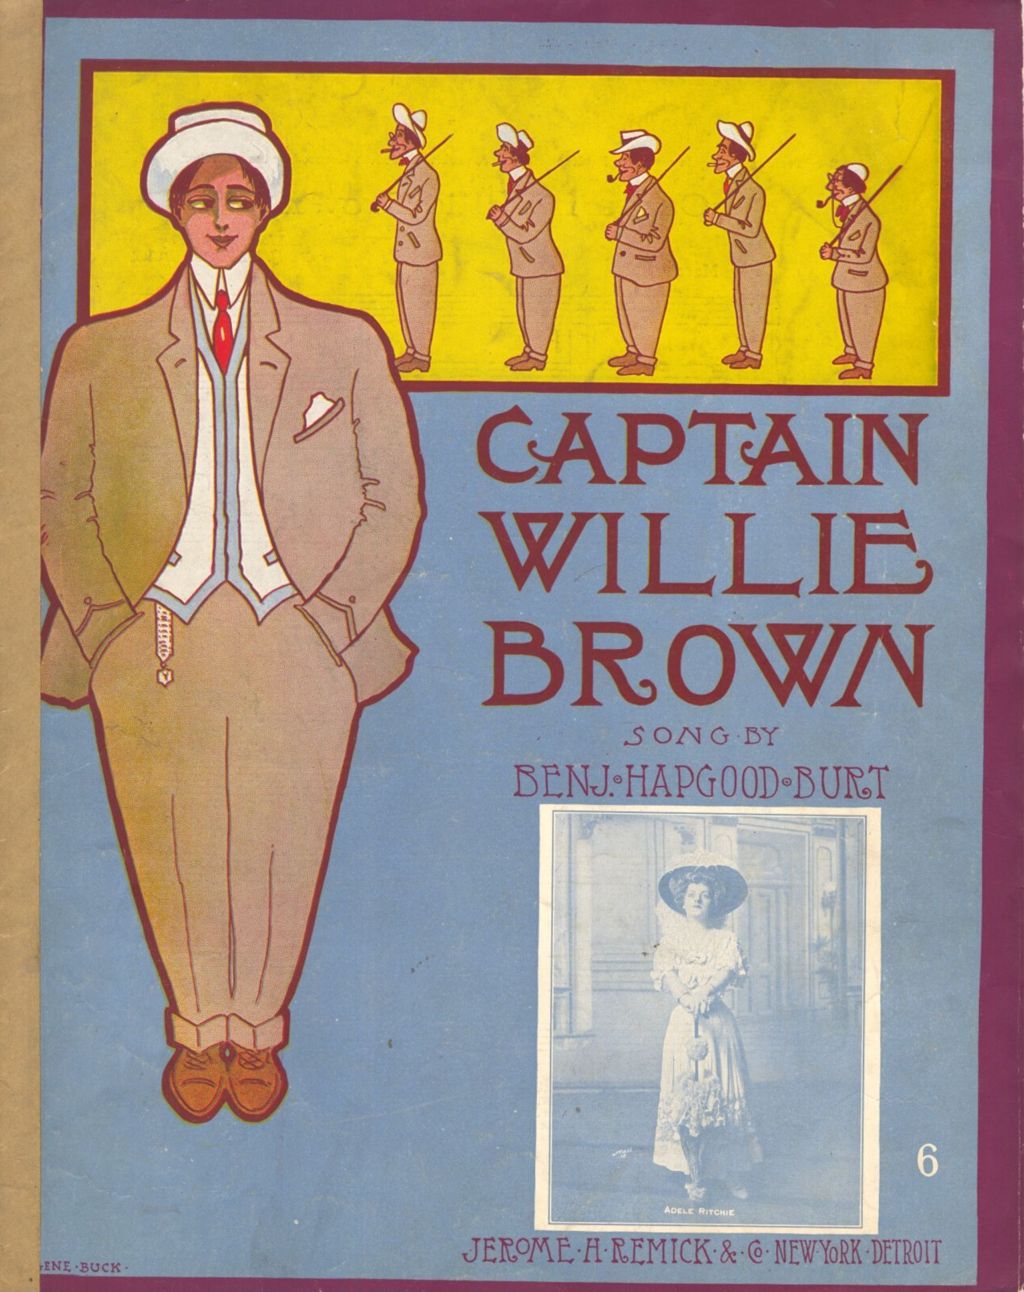 Miniature of Captain Willie Brown